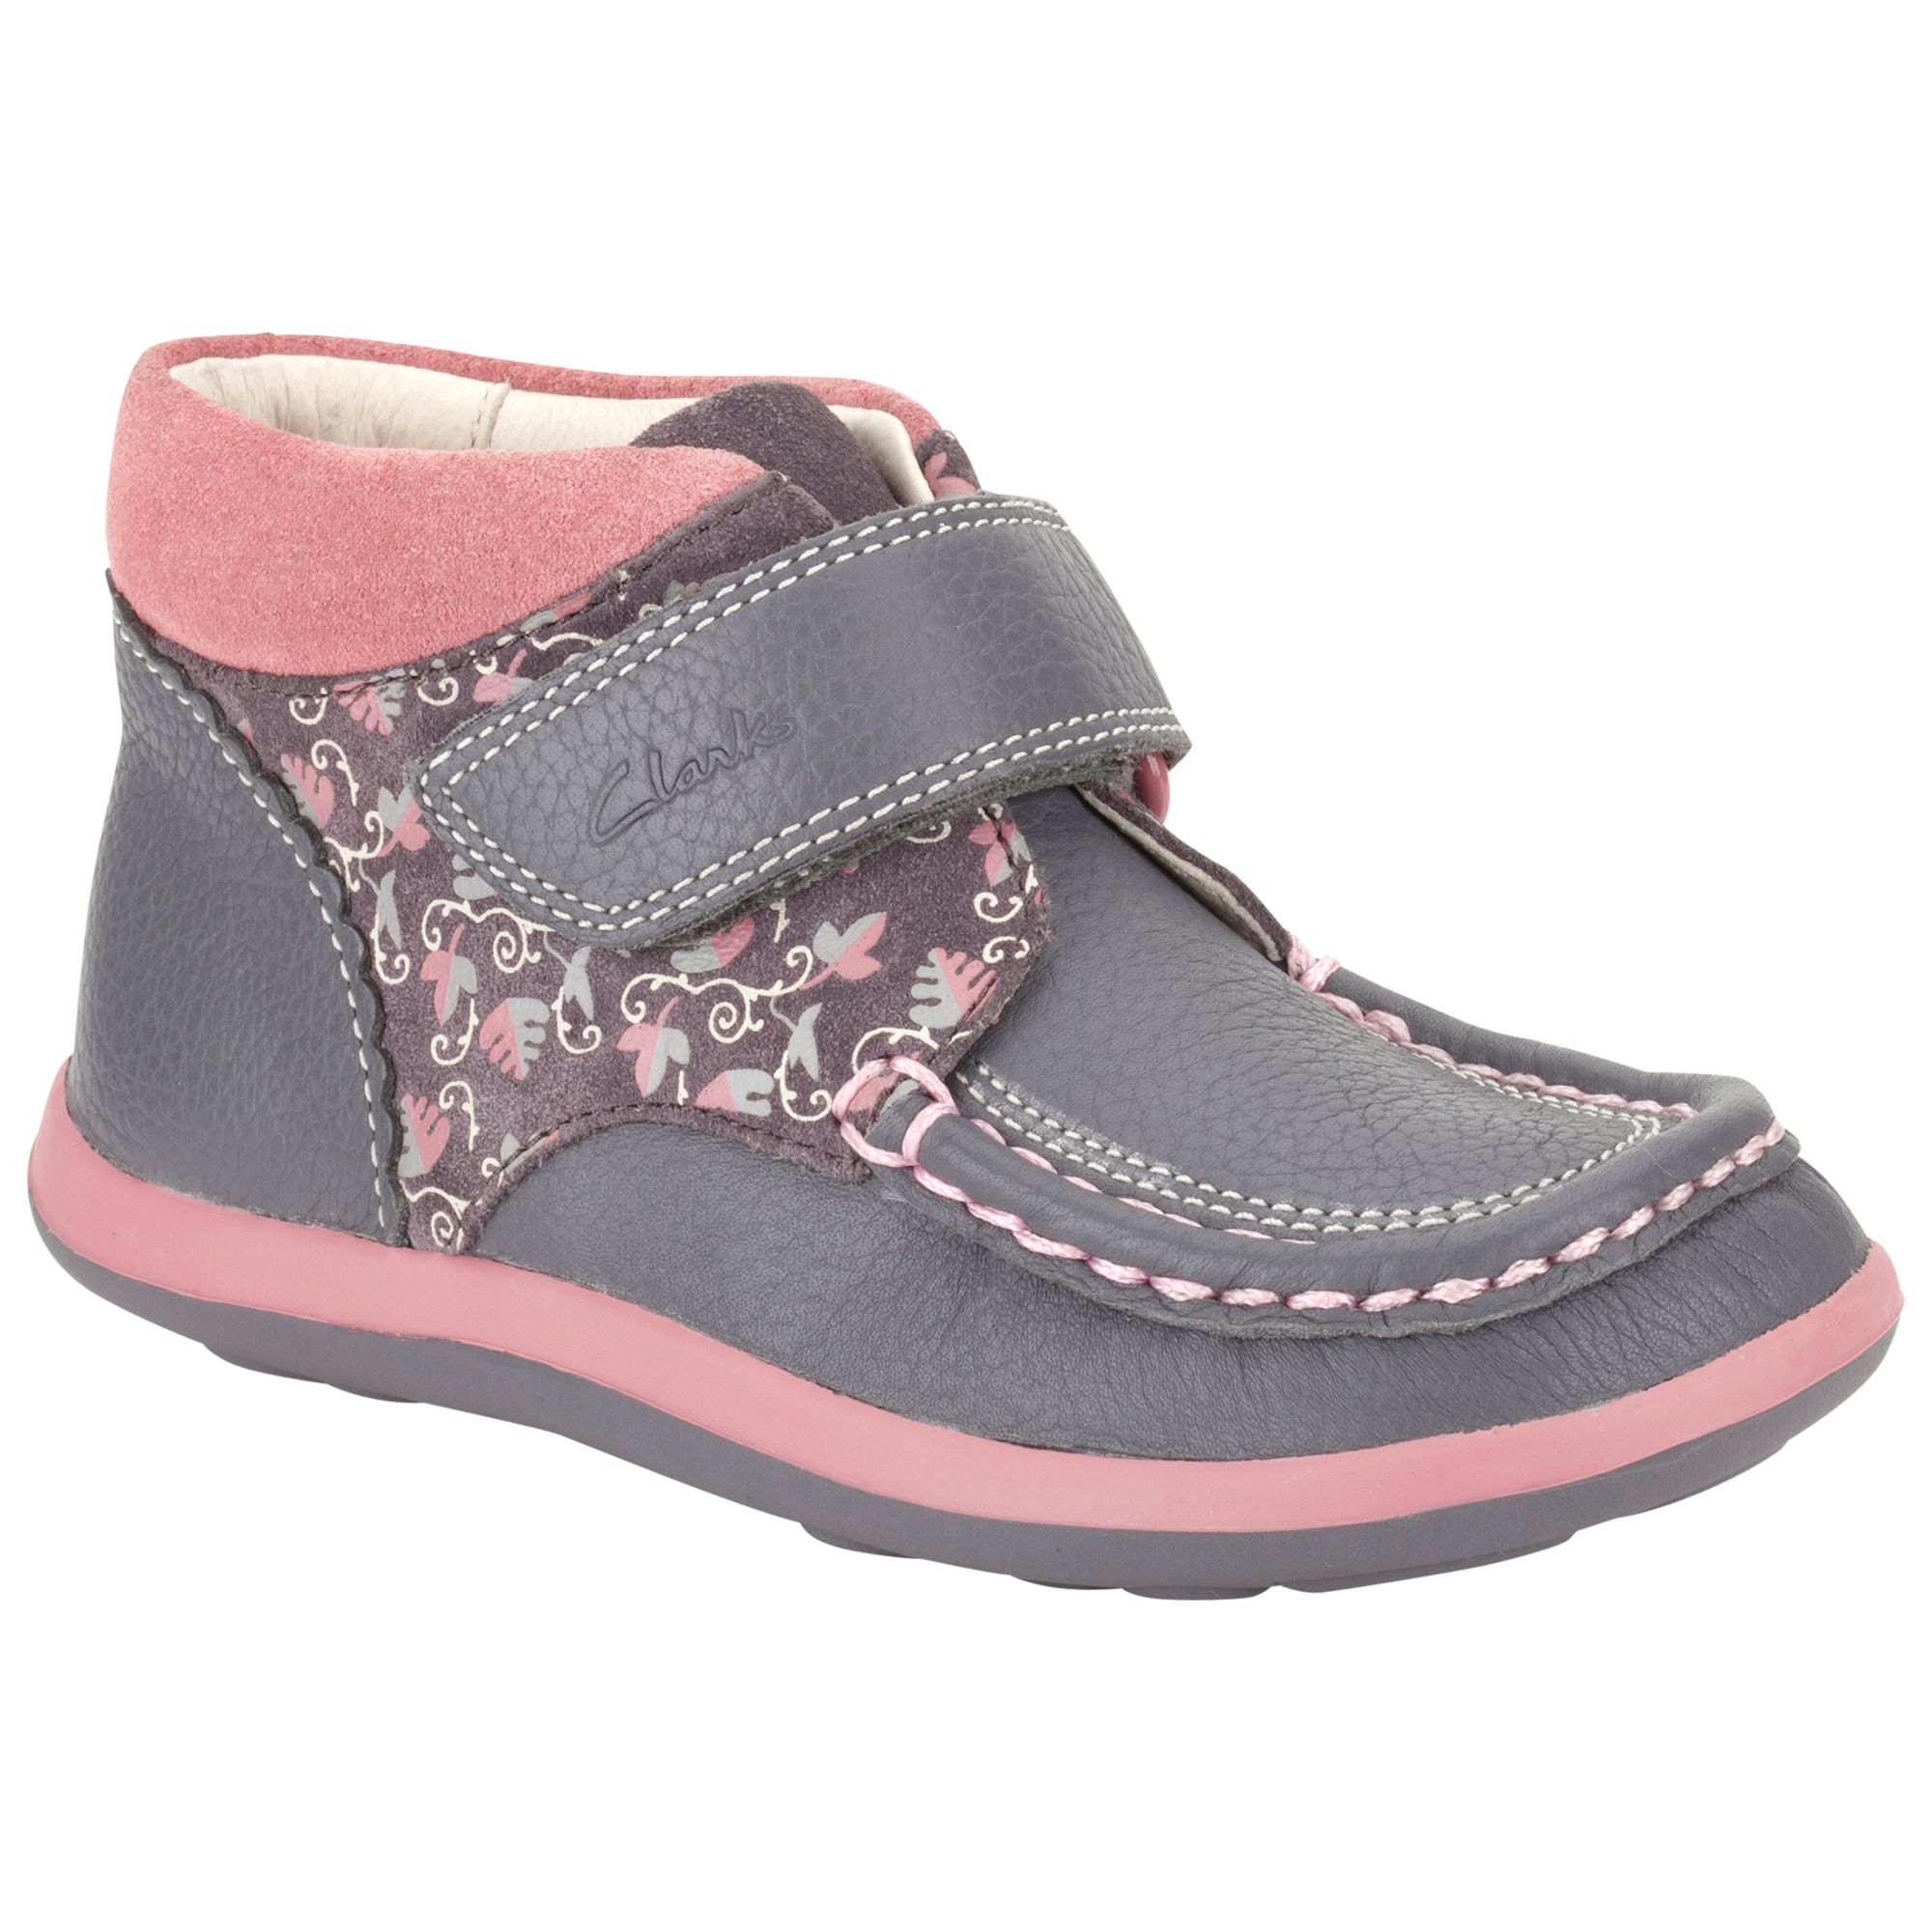 clarks childrens shoes